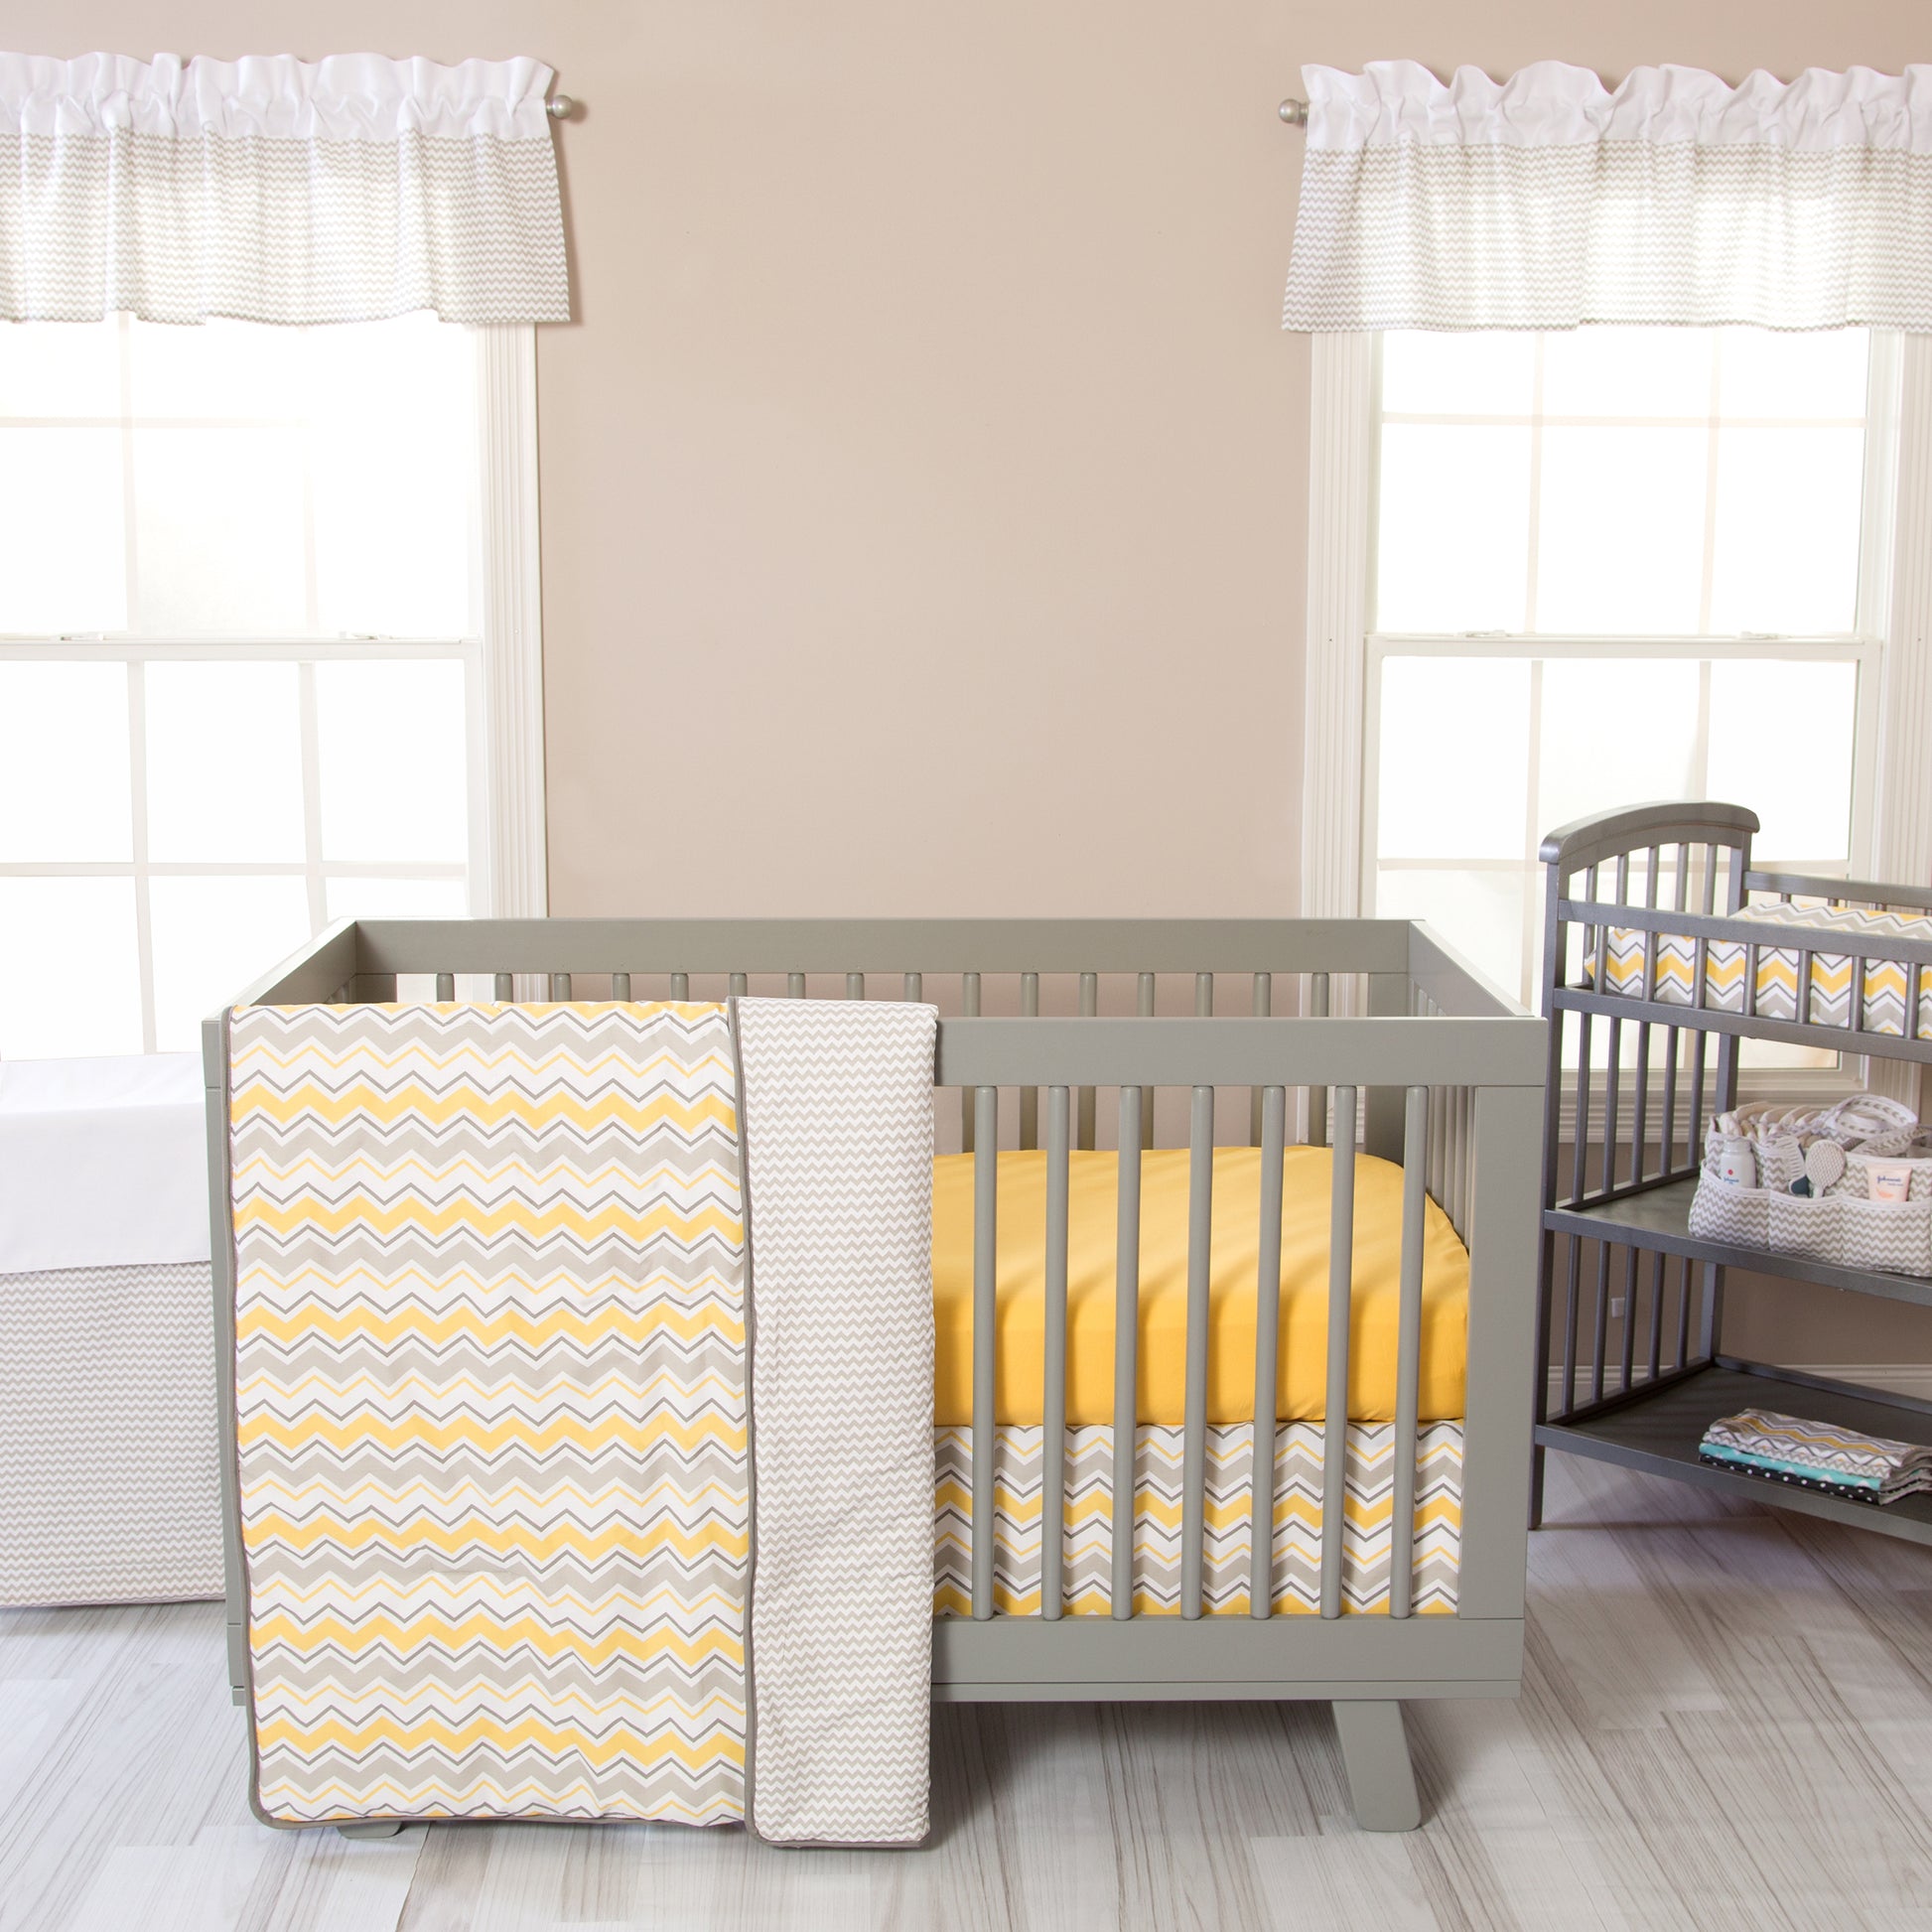 Buttercup Zigzag 3 Piece Crib Bedding Set in a stylized room